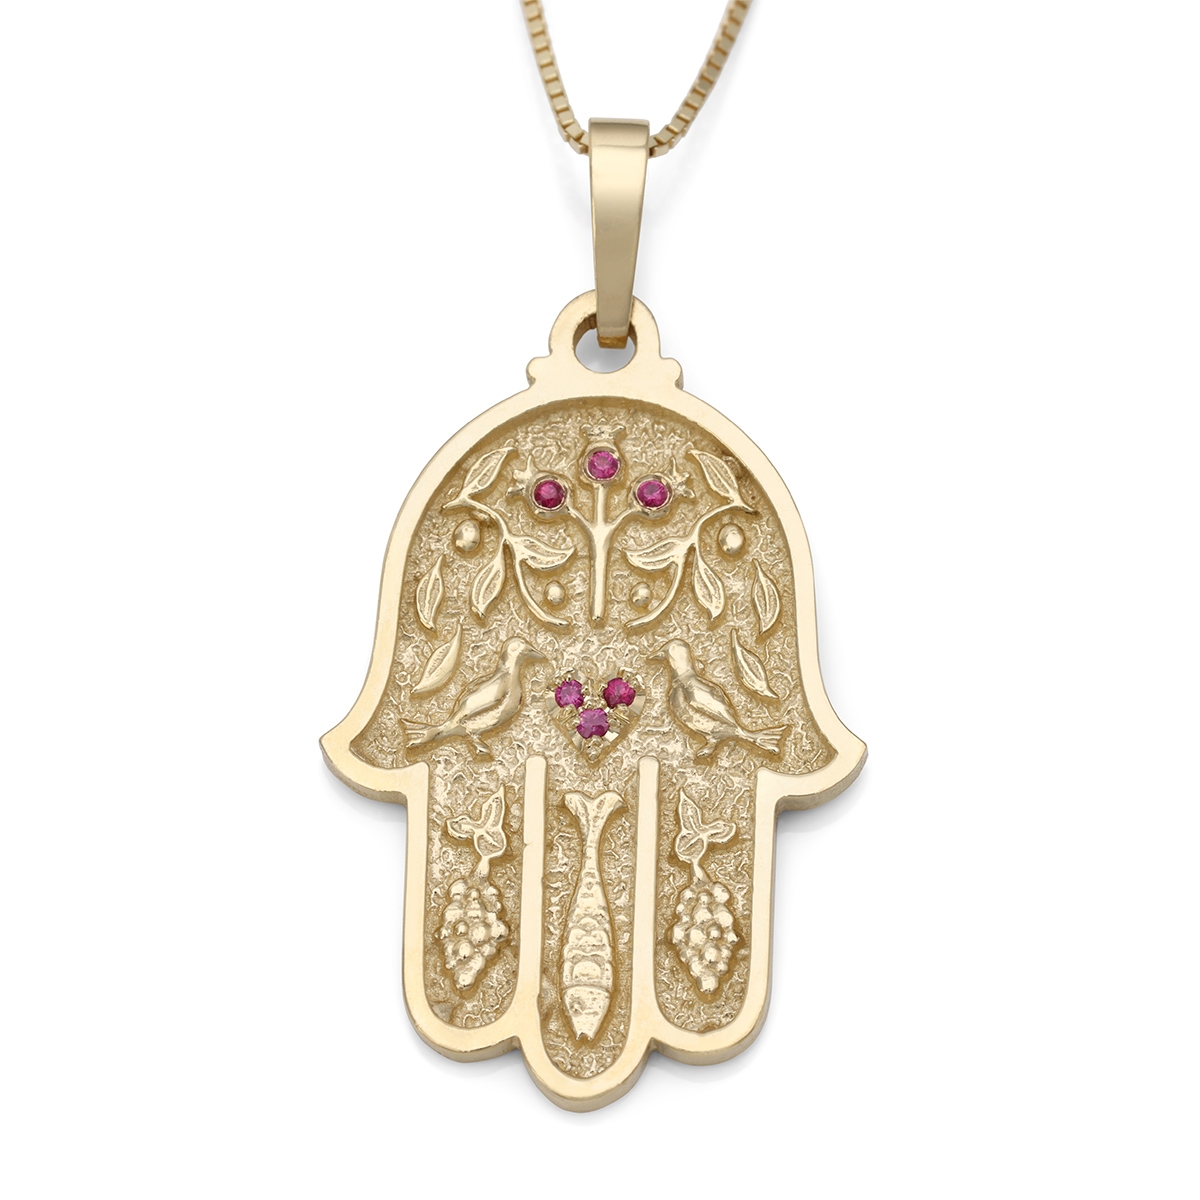 14K Yellow Gold Hamsa Pendant Necklace With Ruby Stones - 1